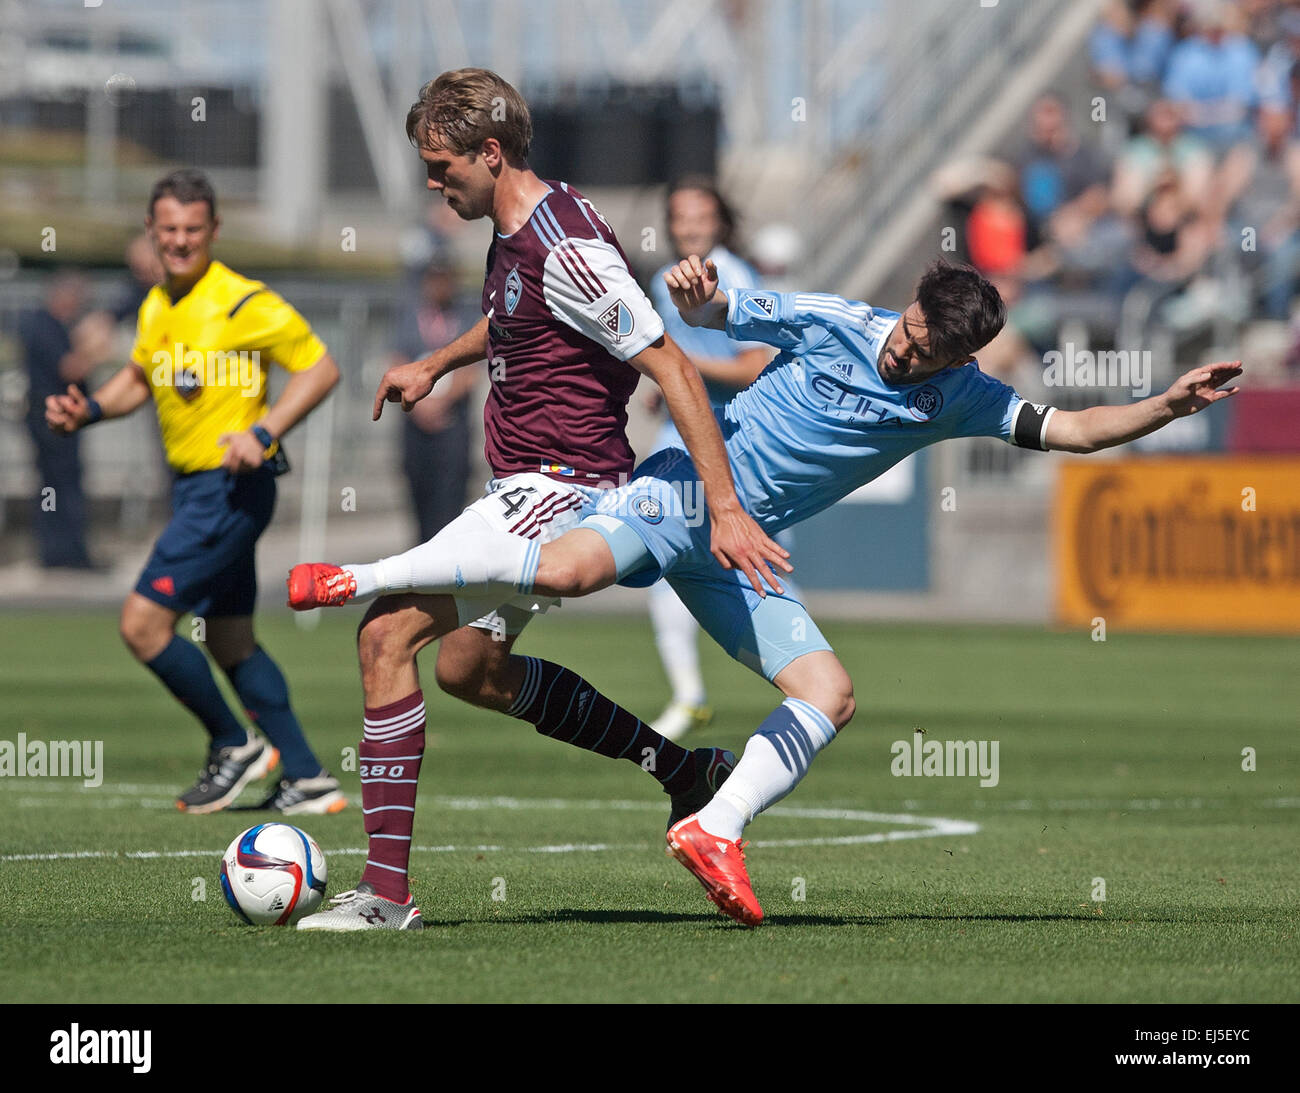 Commerce City, Colorado, USA. 21st Mar, 2015. Rapids D MARC BURCH, left, battles for control of the ball during the 2nd. Half at Dicks Sporting Goods Park during the Rapids Home Opener Saturday afternoon. Rapids & New York City FC draw to 0-0. © Hector Acevedo/ZUMA Wire/Alamy Live News Stock Photo